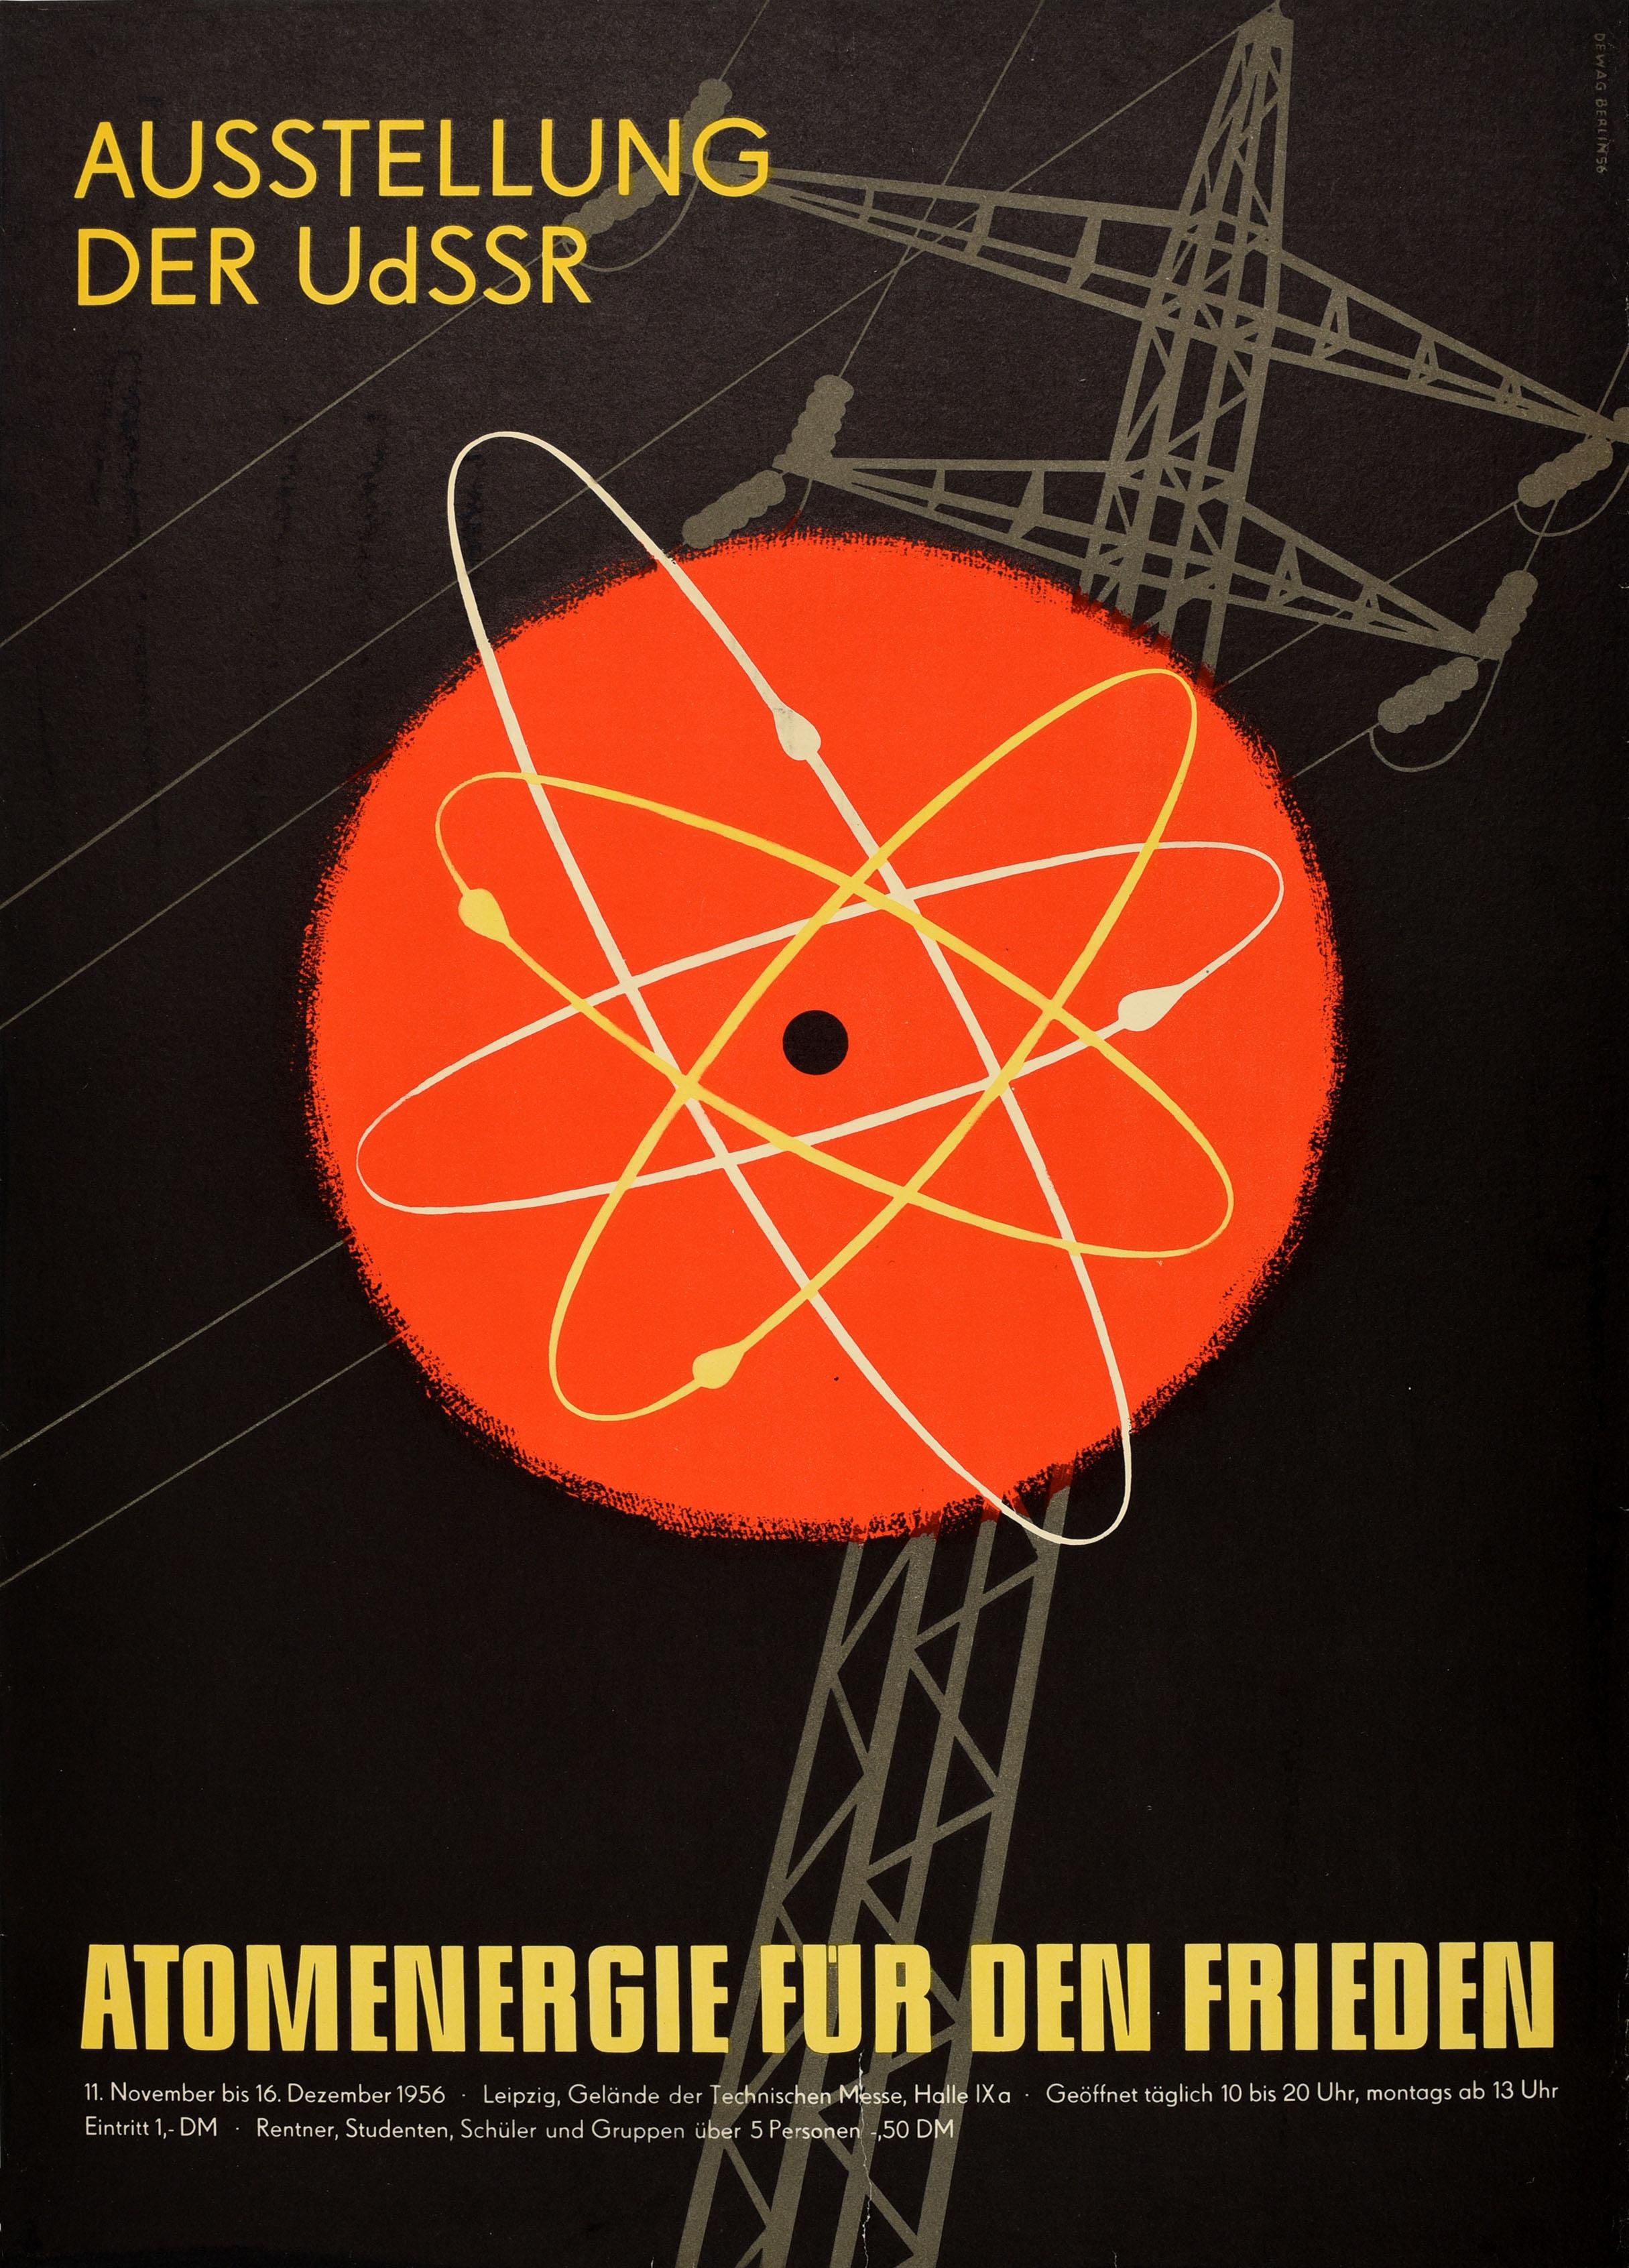 Unknown Print - Original Vintage Poster Atomic Energy For Peace USSR Exhibition Leipzig Fair